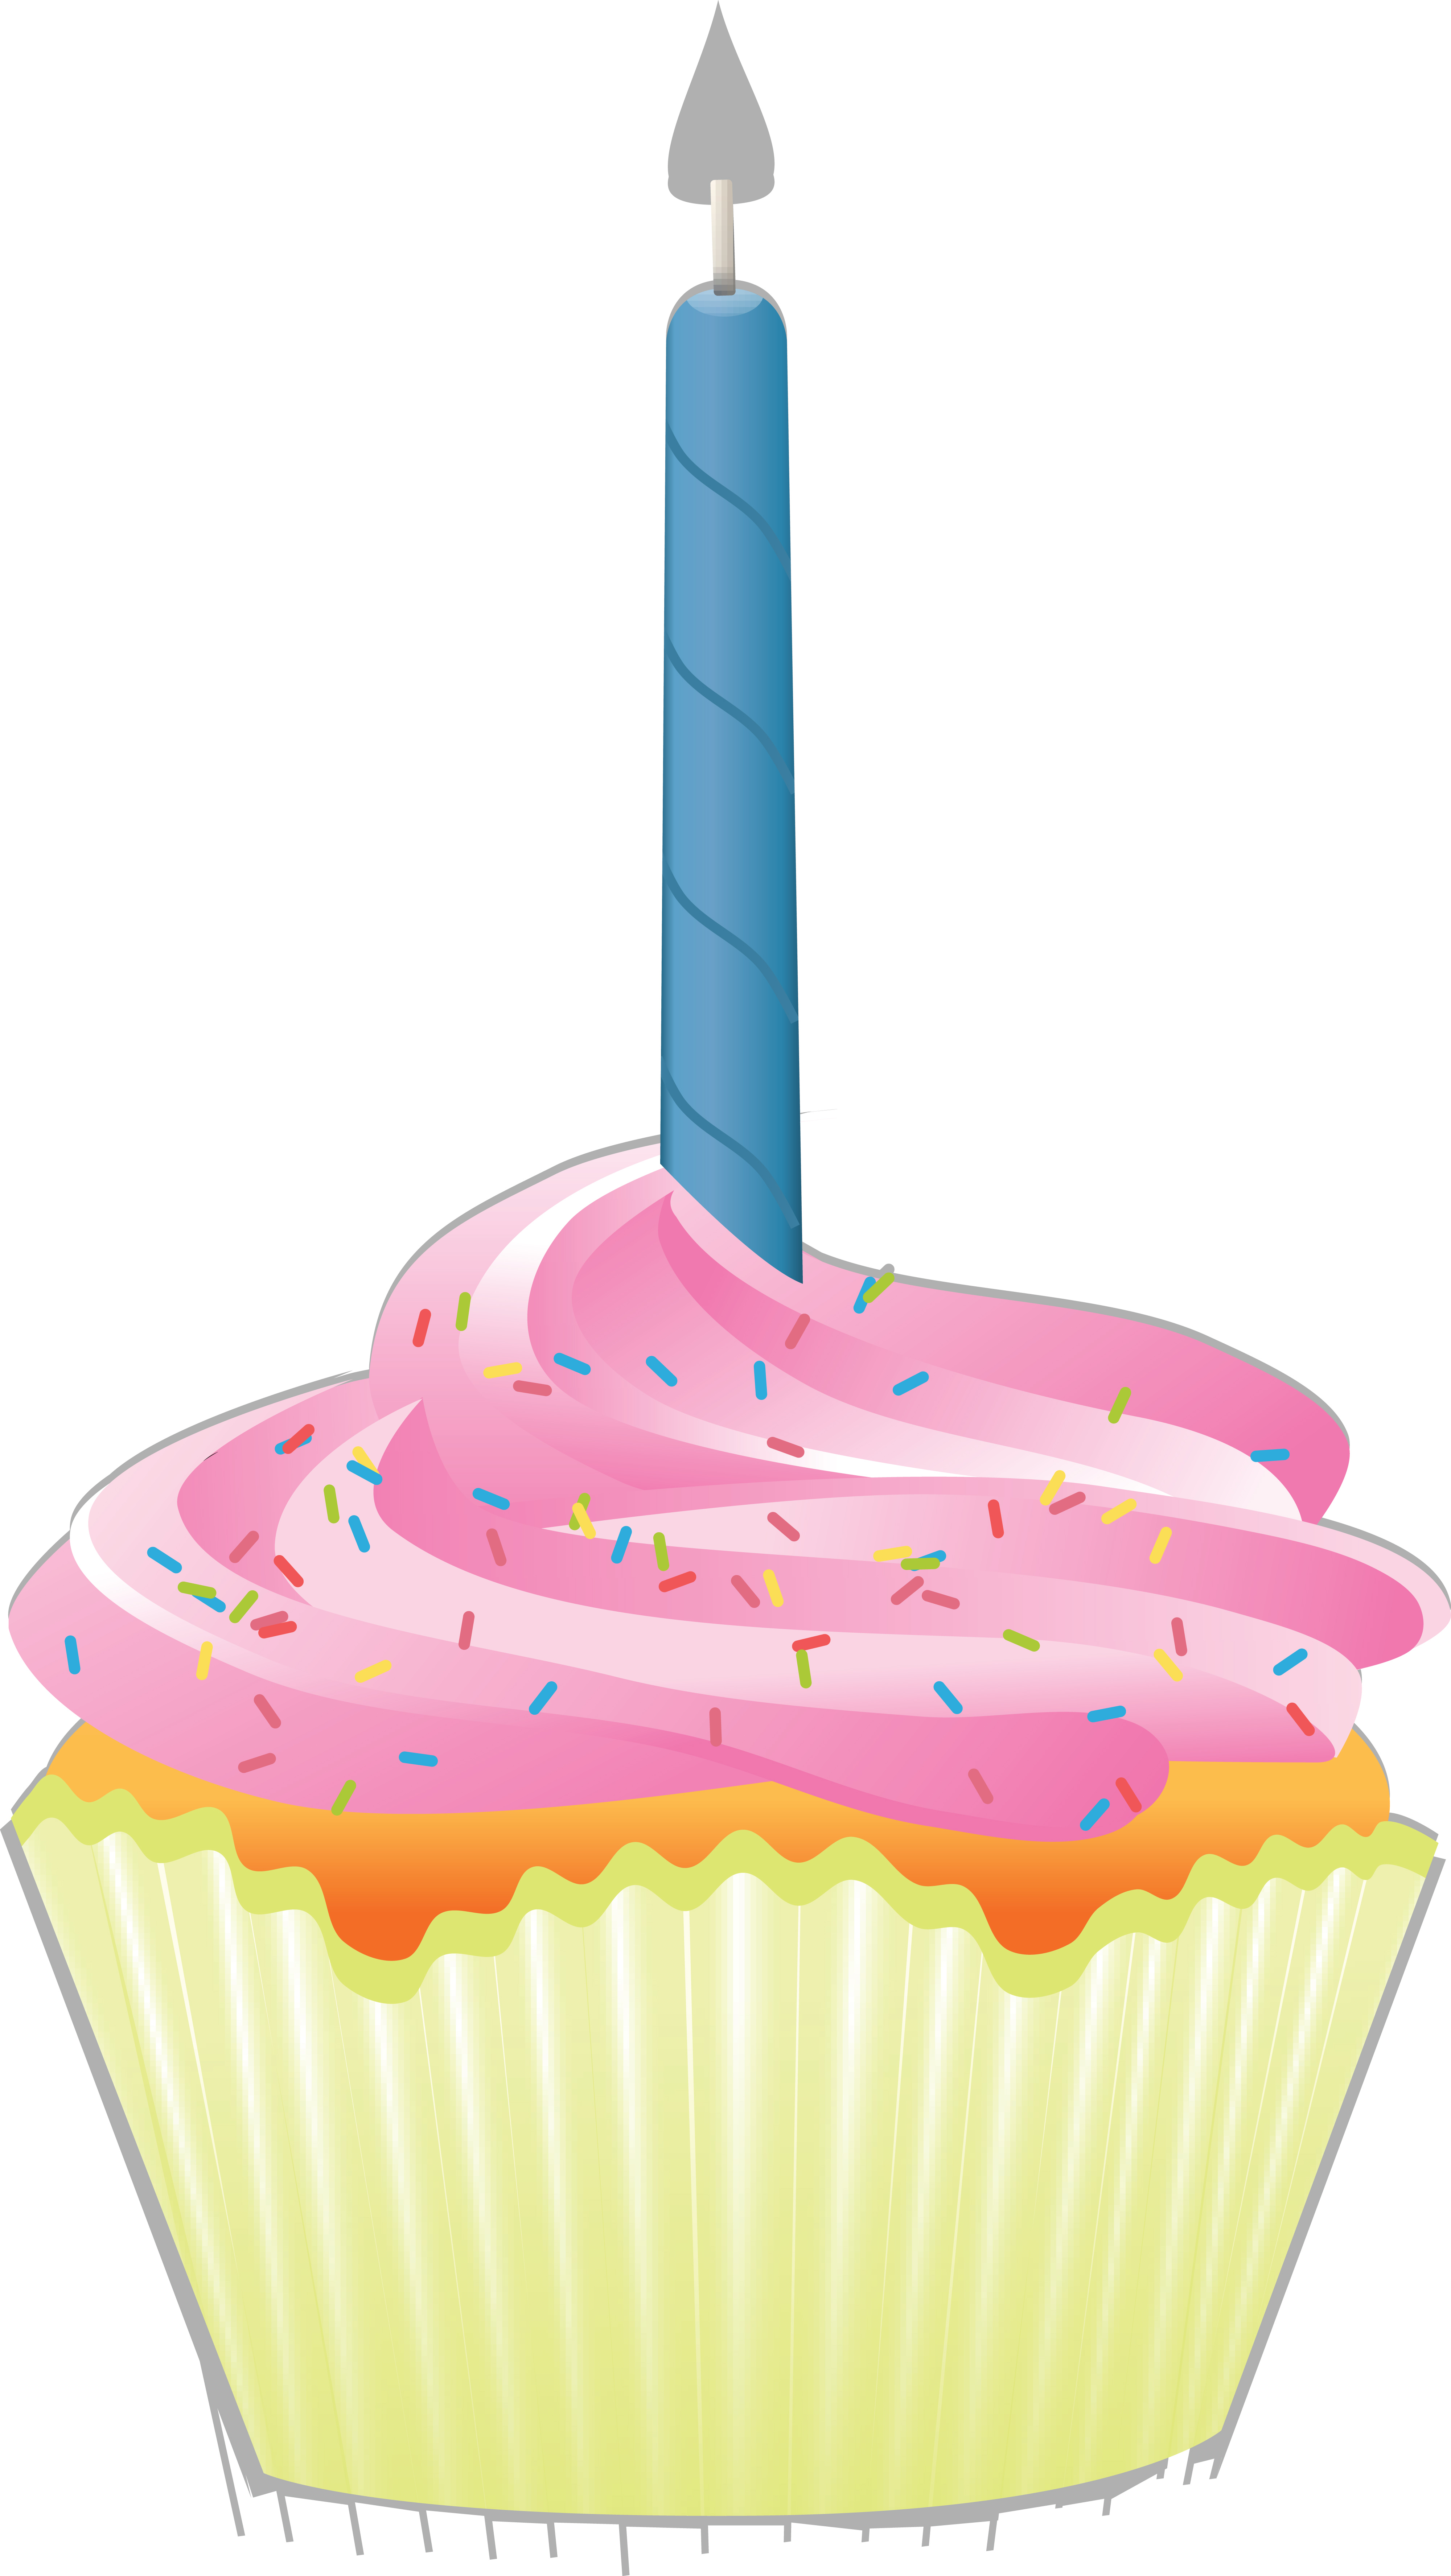 Cupcake With Candle Clipart.